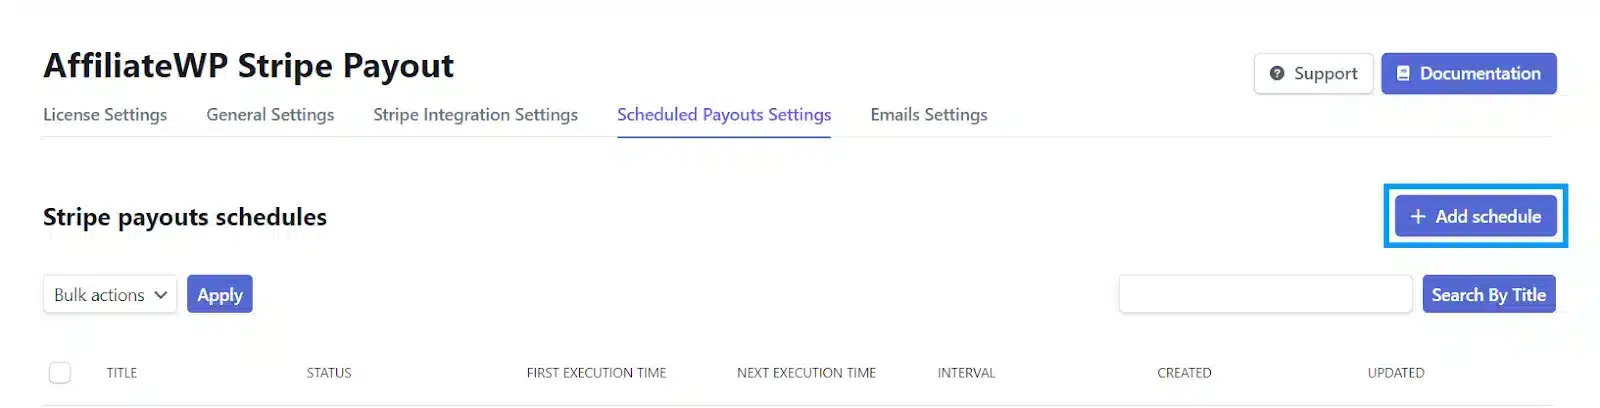 AffiliateWP-Stripe-Payout-Scheduled-Payout-Settings-1.png.webp